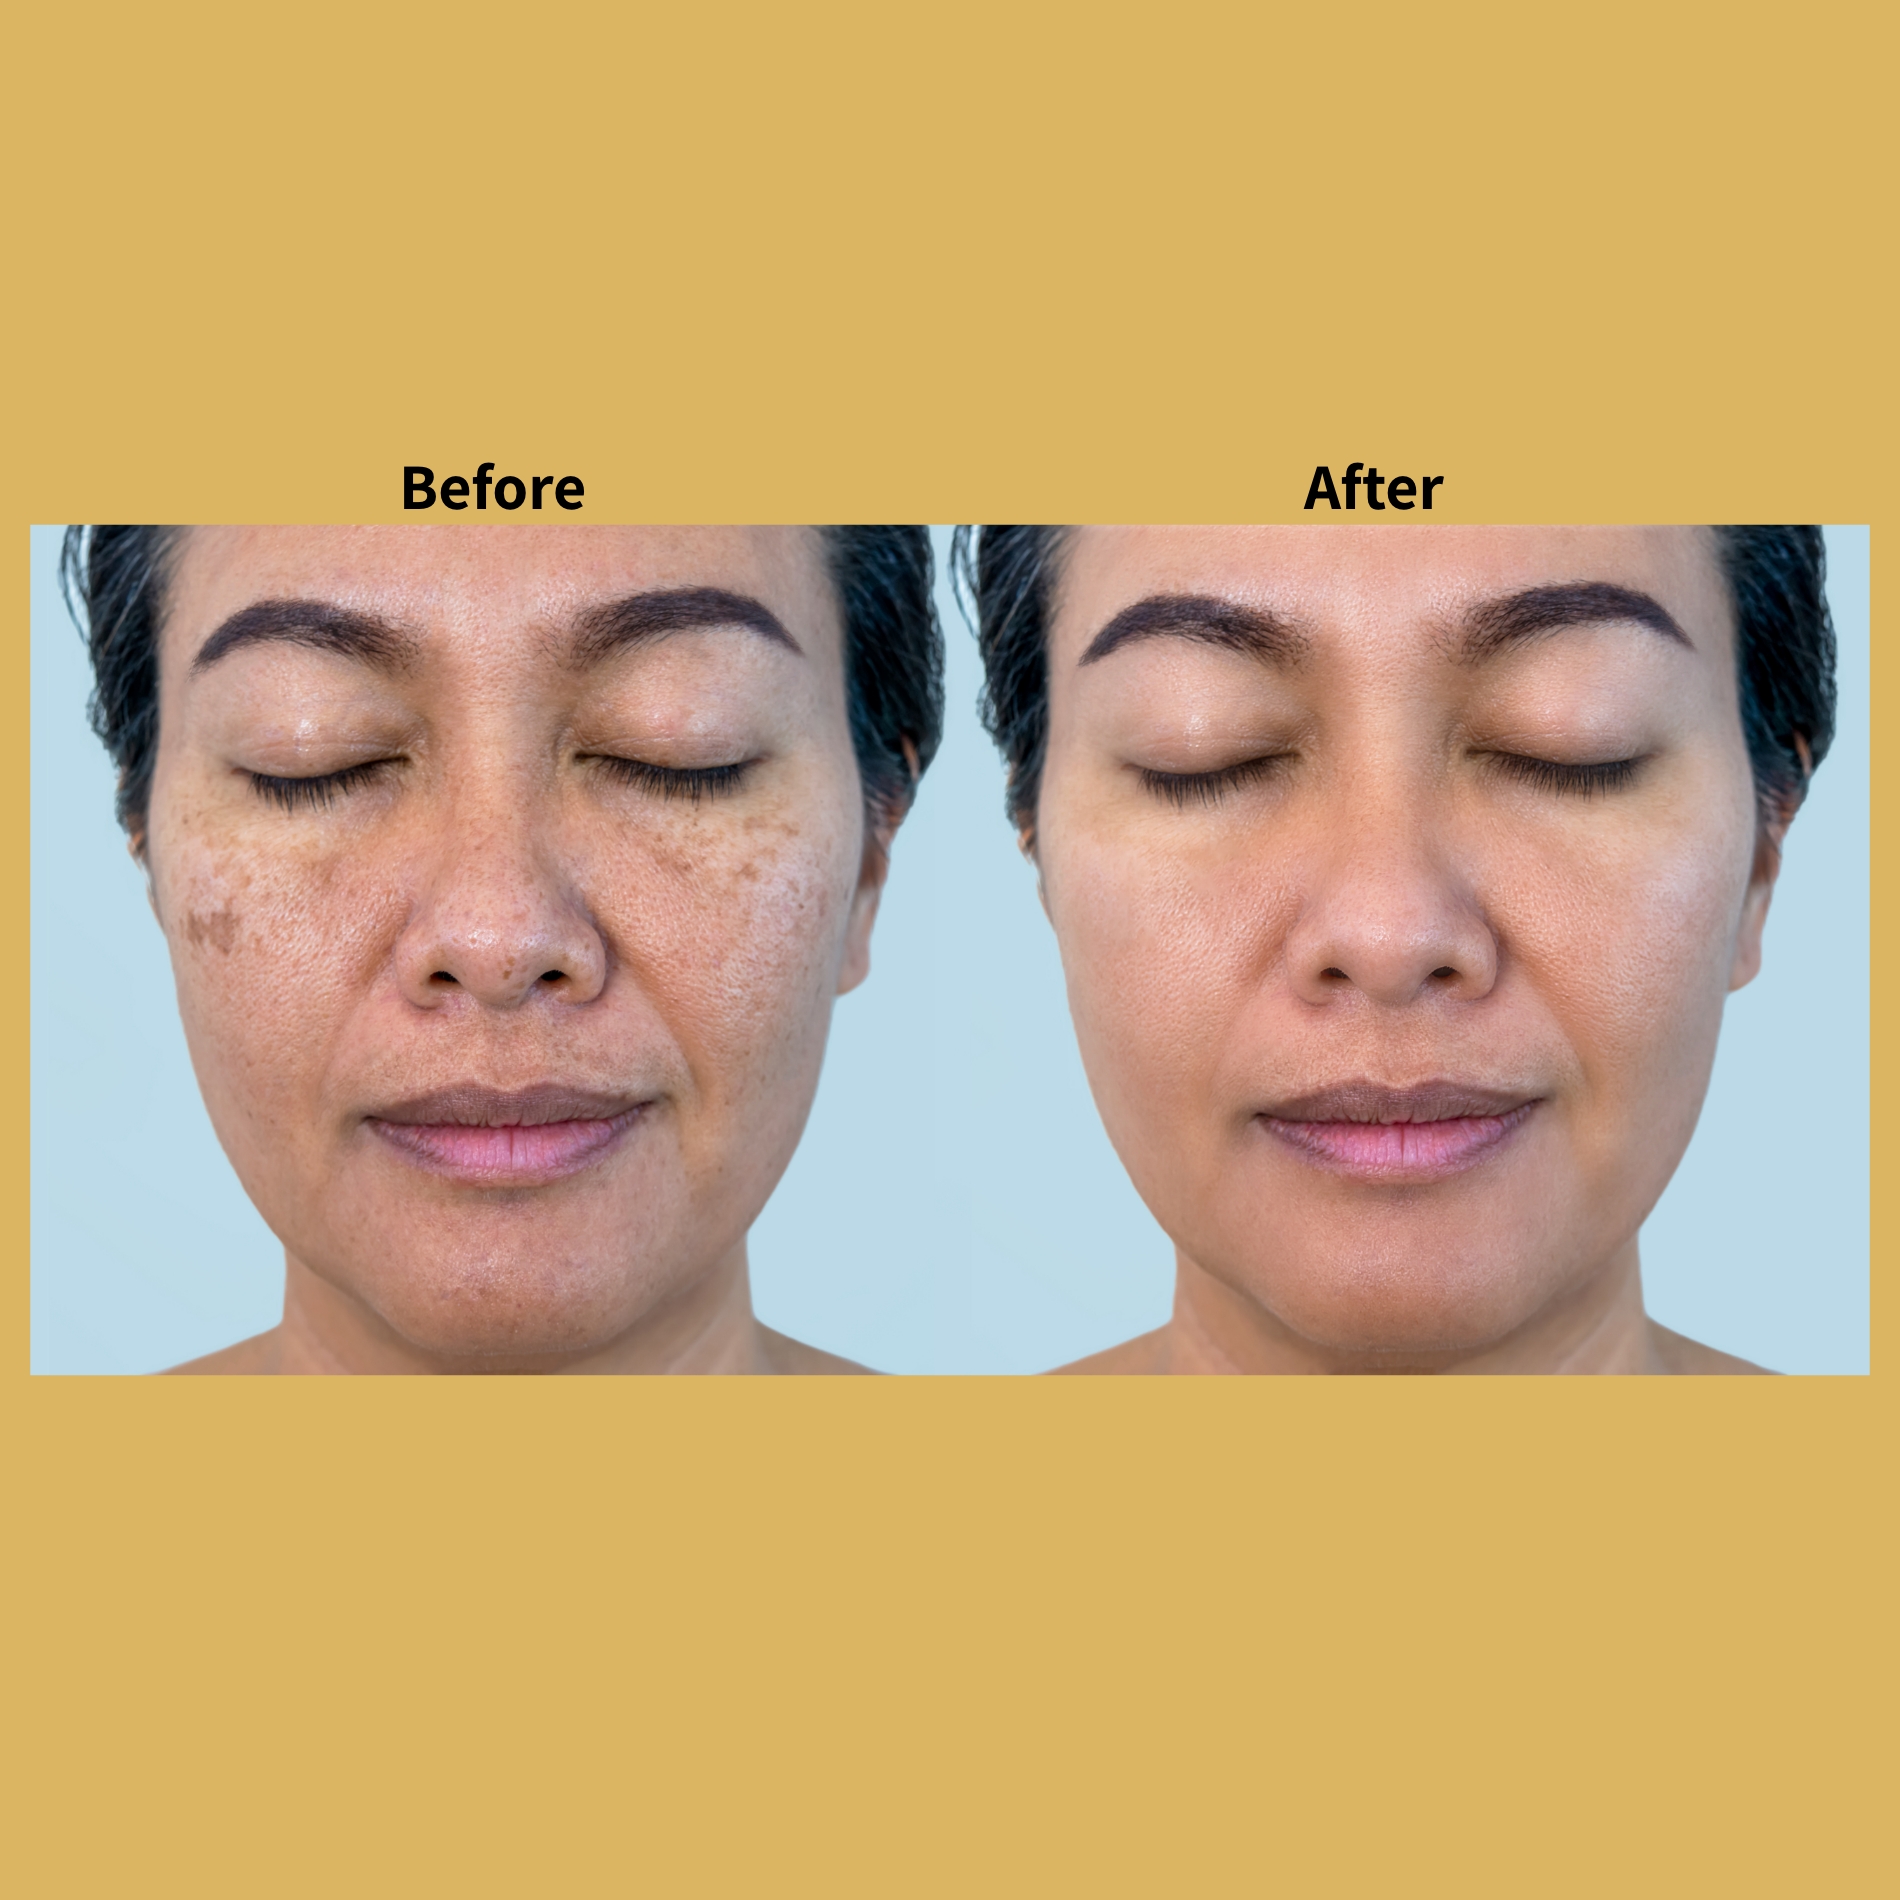 Co2 Fractional Laser Treatment Before and After Photos | Soleil Medical & Beauty Spa in Portland, OR